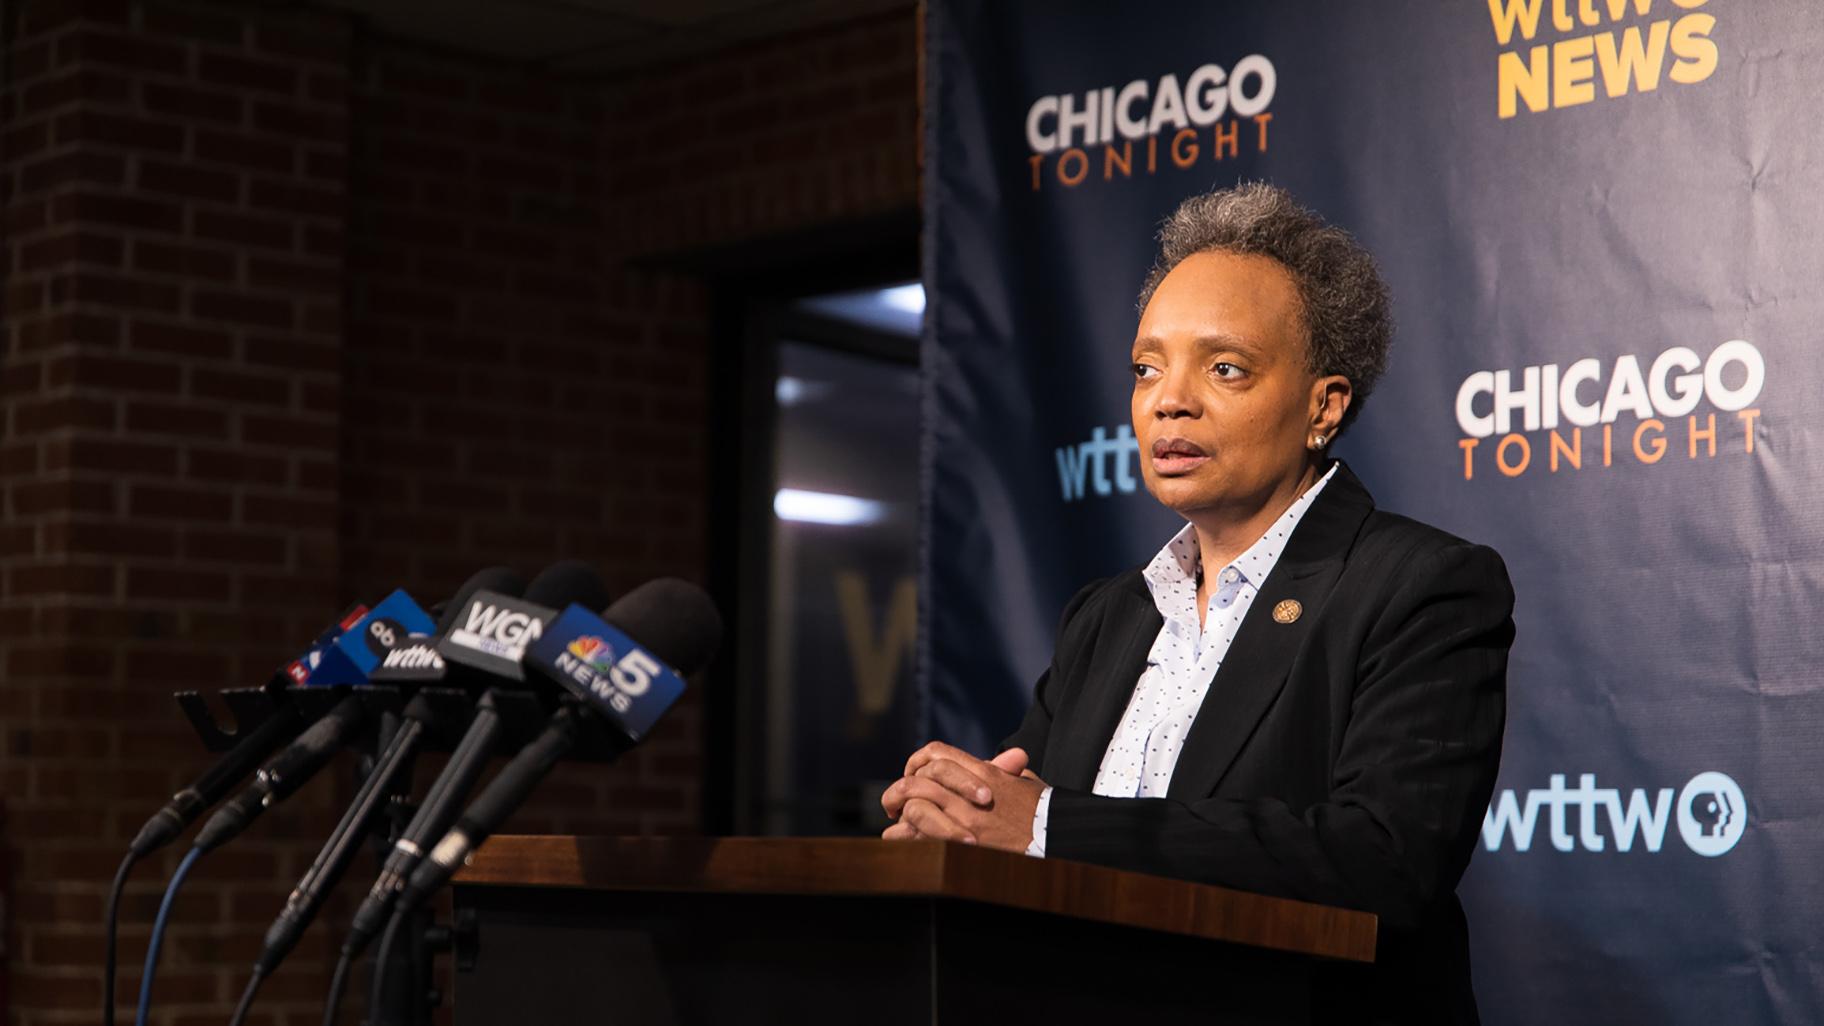 Mayor Lori Lightfoot, who is running for a second term as Chicago mayor, addressing a question from Medill School of Journalism students at a press conference after the WTTW News Mayoral Forum on Feb. 7, 2023. (Michael Izquierdo / WTTW News)